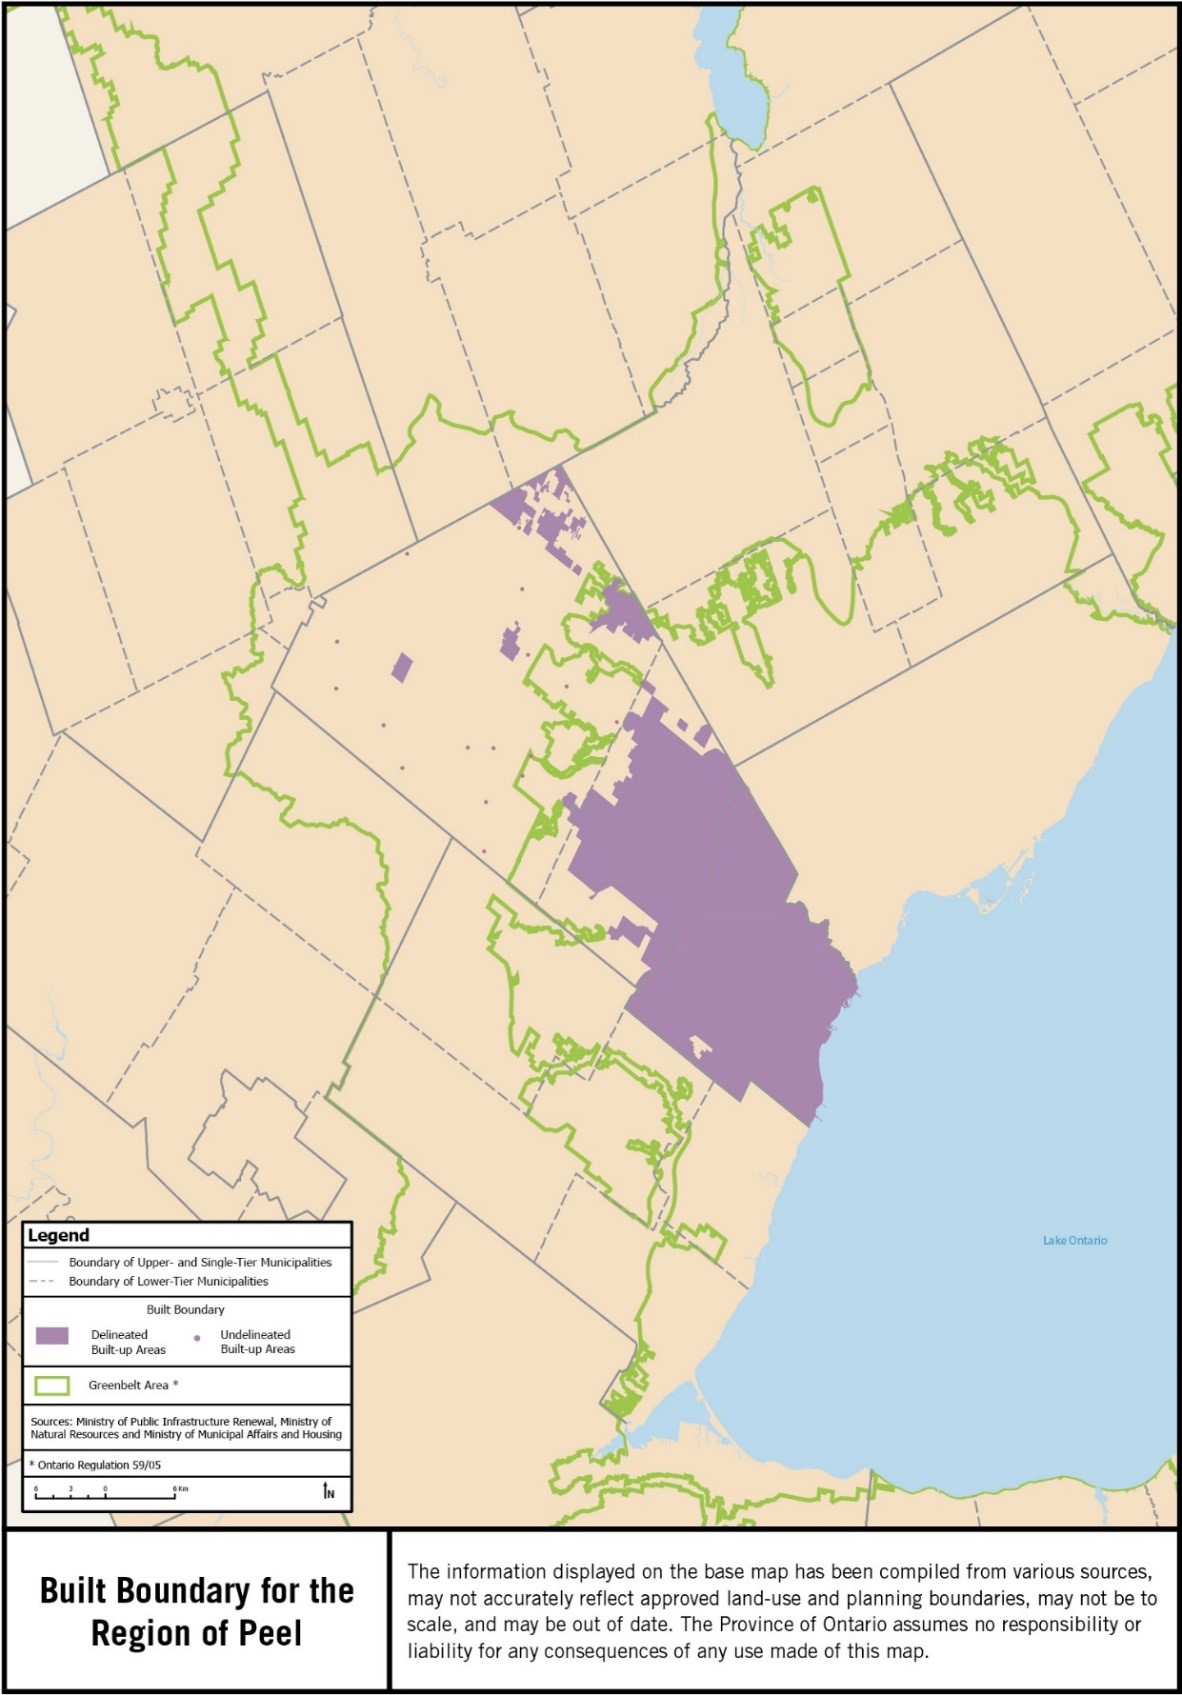 Map showing the built boundary for the Region of Peel.